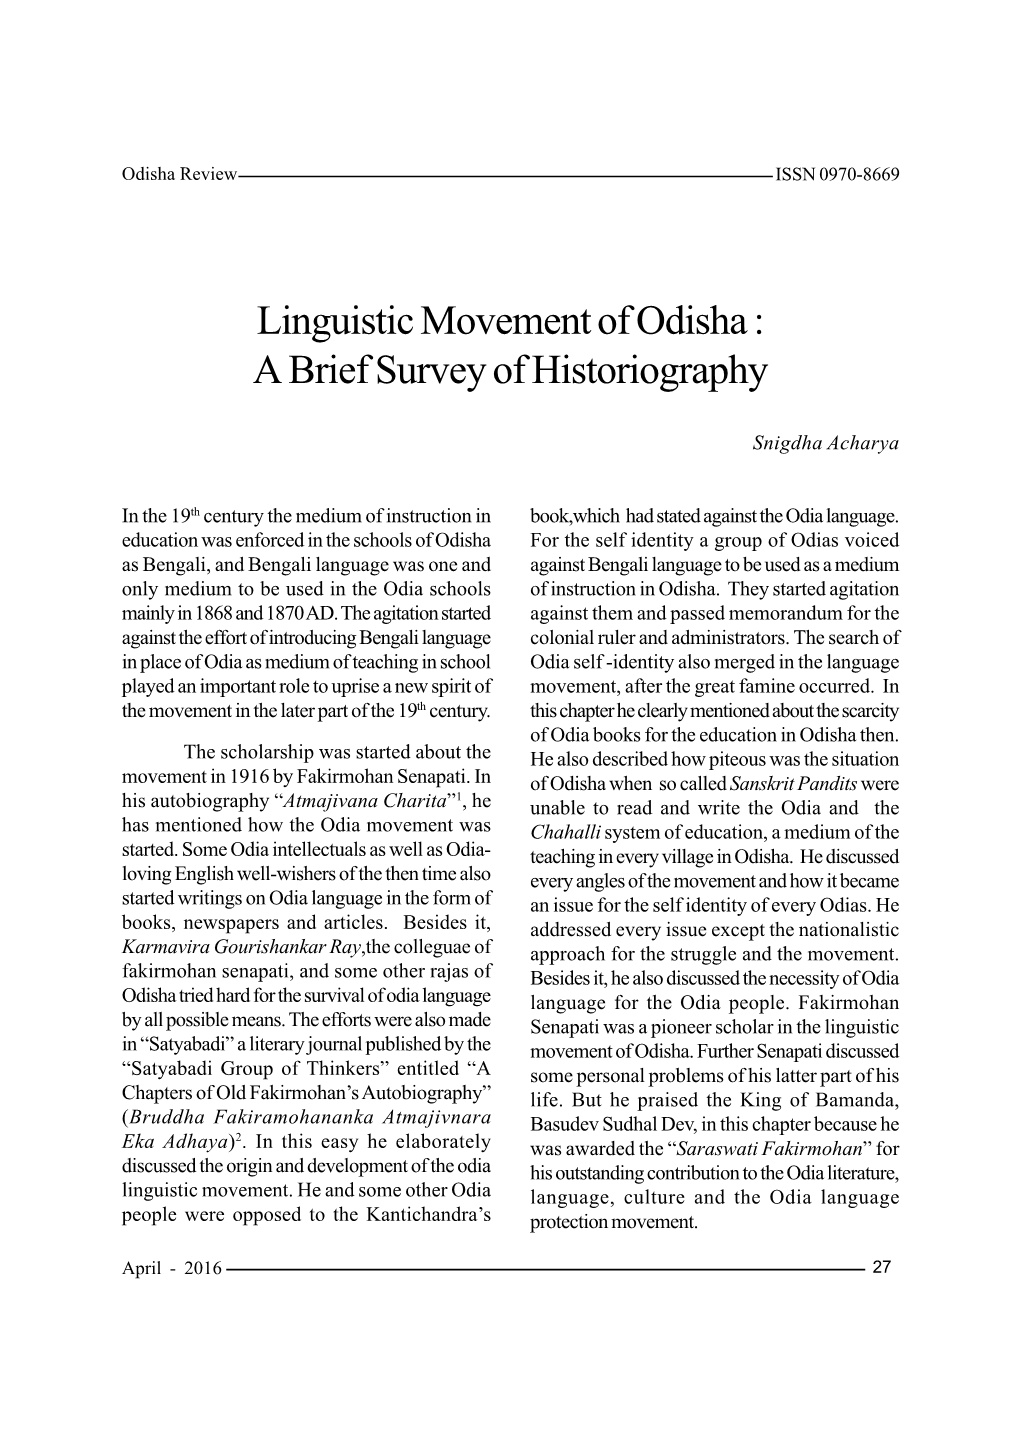 Linguistic Movement of Odisha : a Brief Survey of Historiography